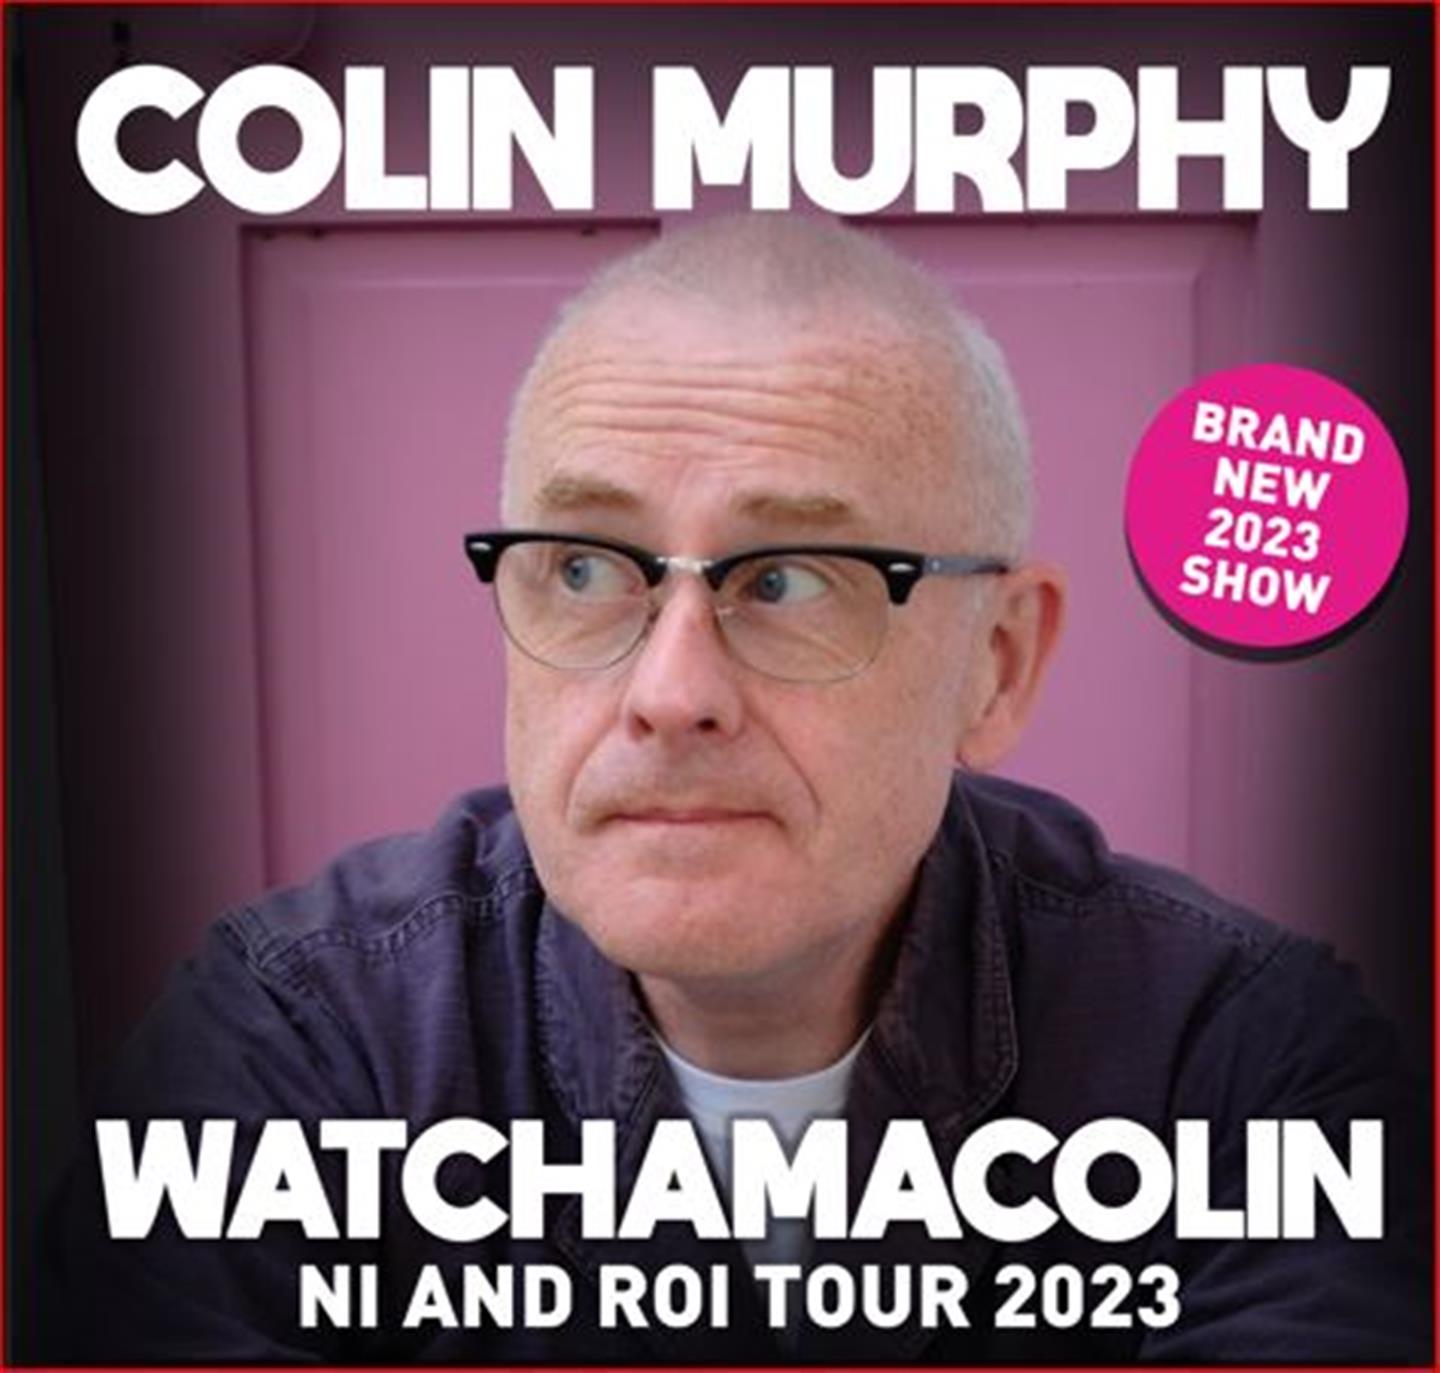 COLIN MURPHY - Whatchmacolin tour 